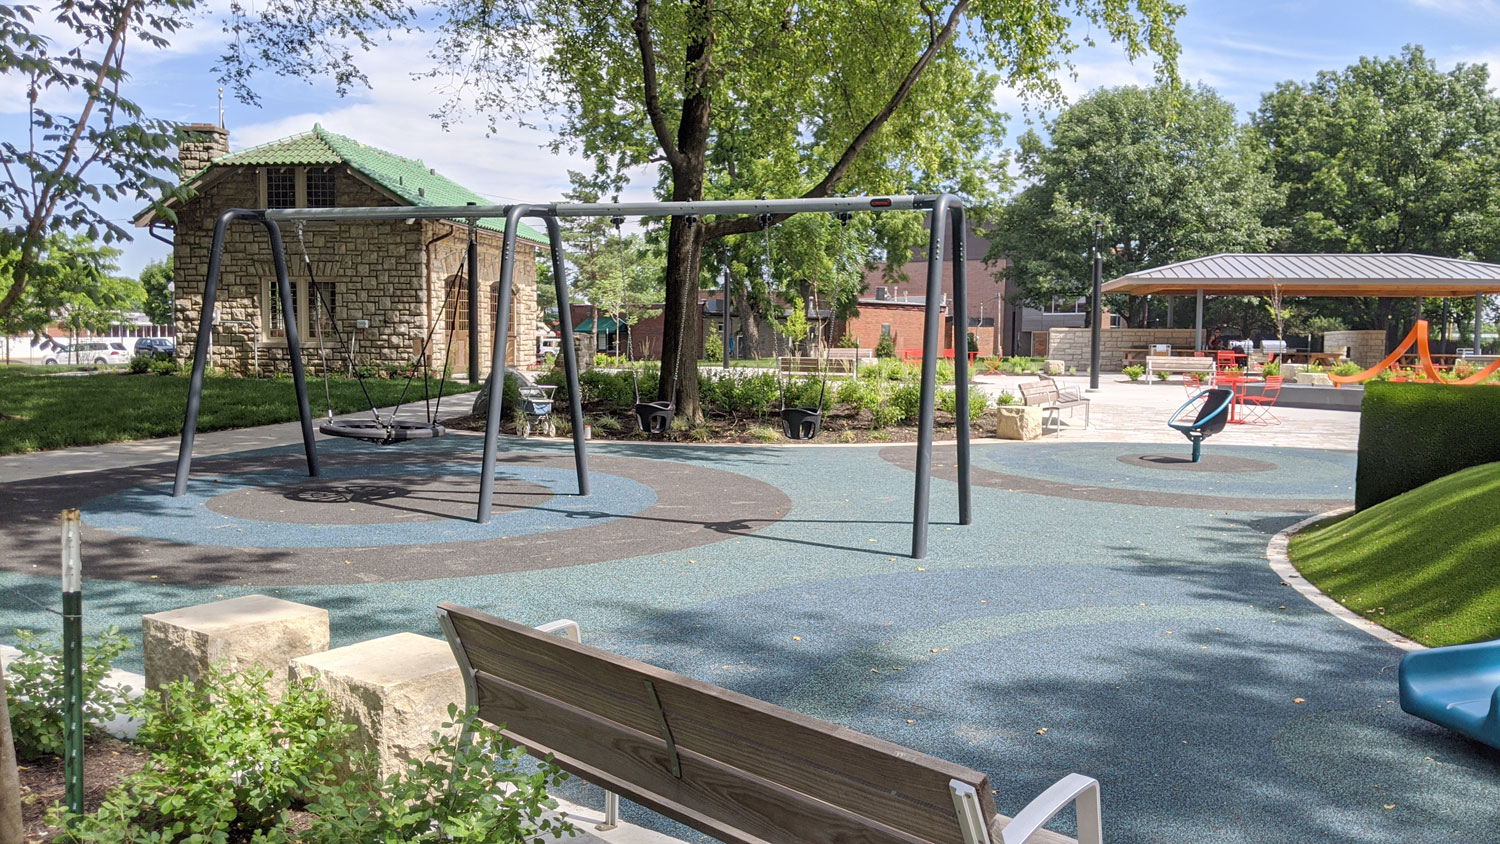 This is an image of downtown overland park thompson park playground swings carriage house web